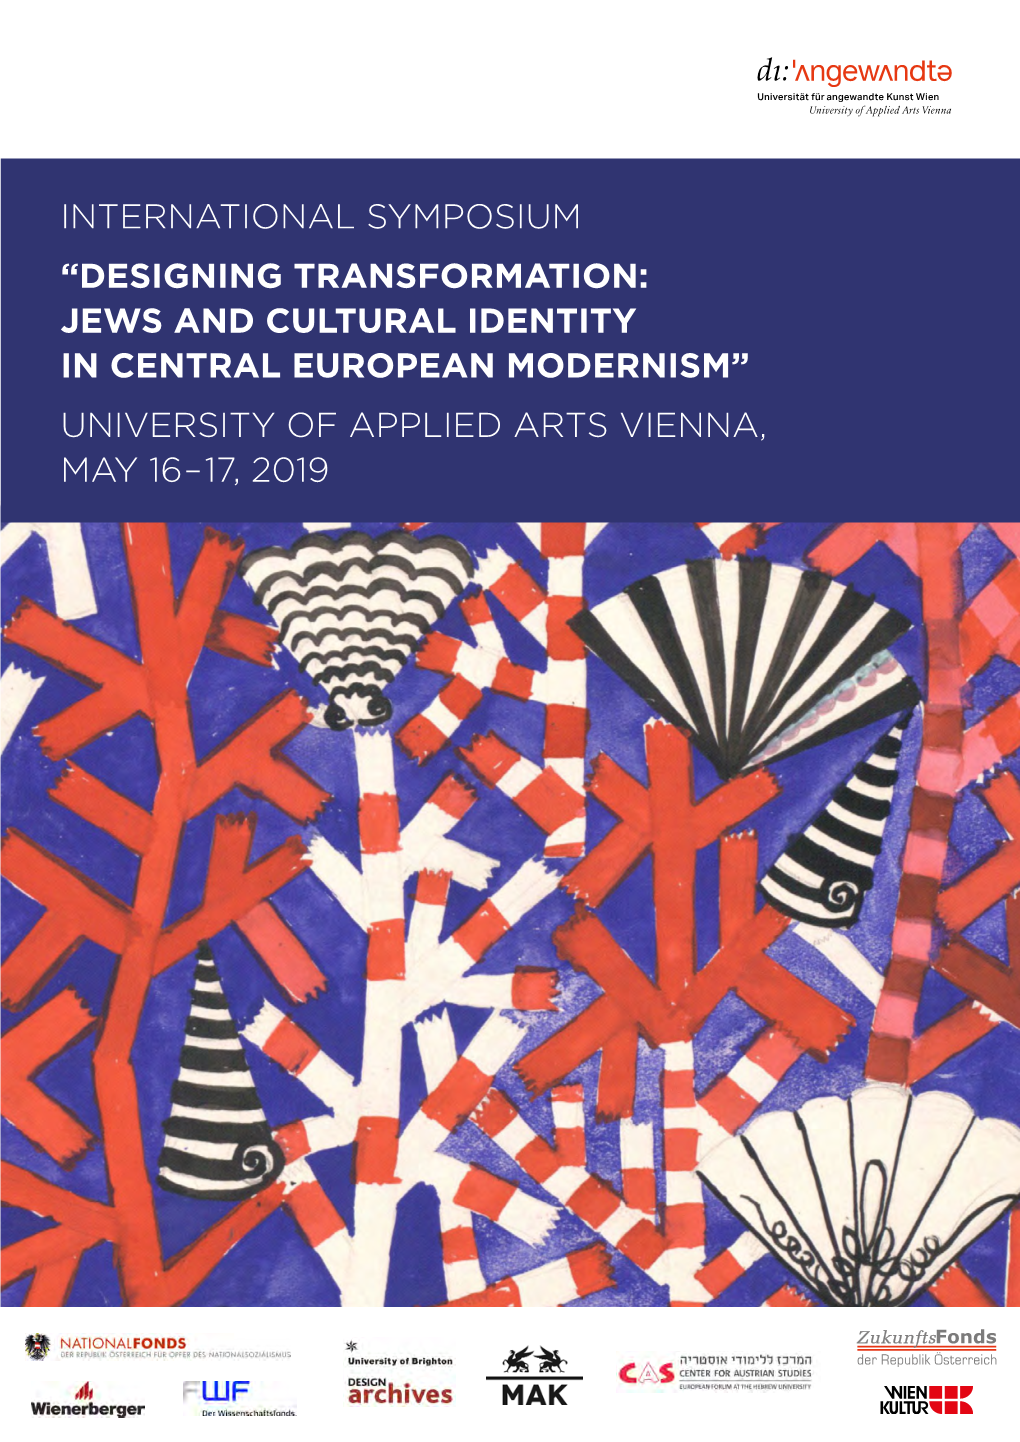 International Symposium “Designing Transformation: Jews and Cultural Identity in Central European Modernism”